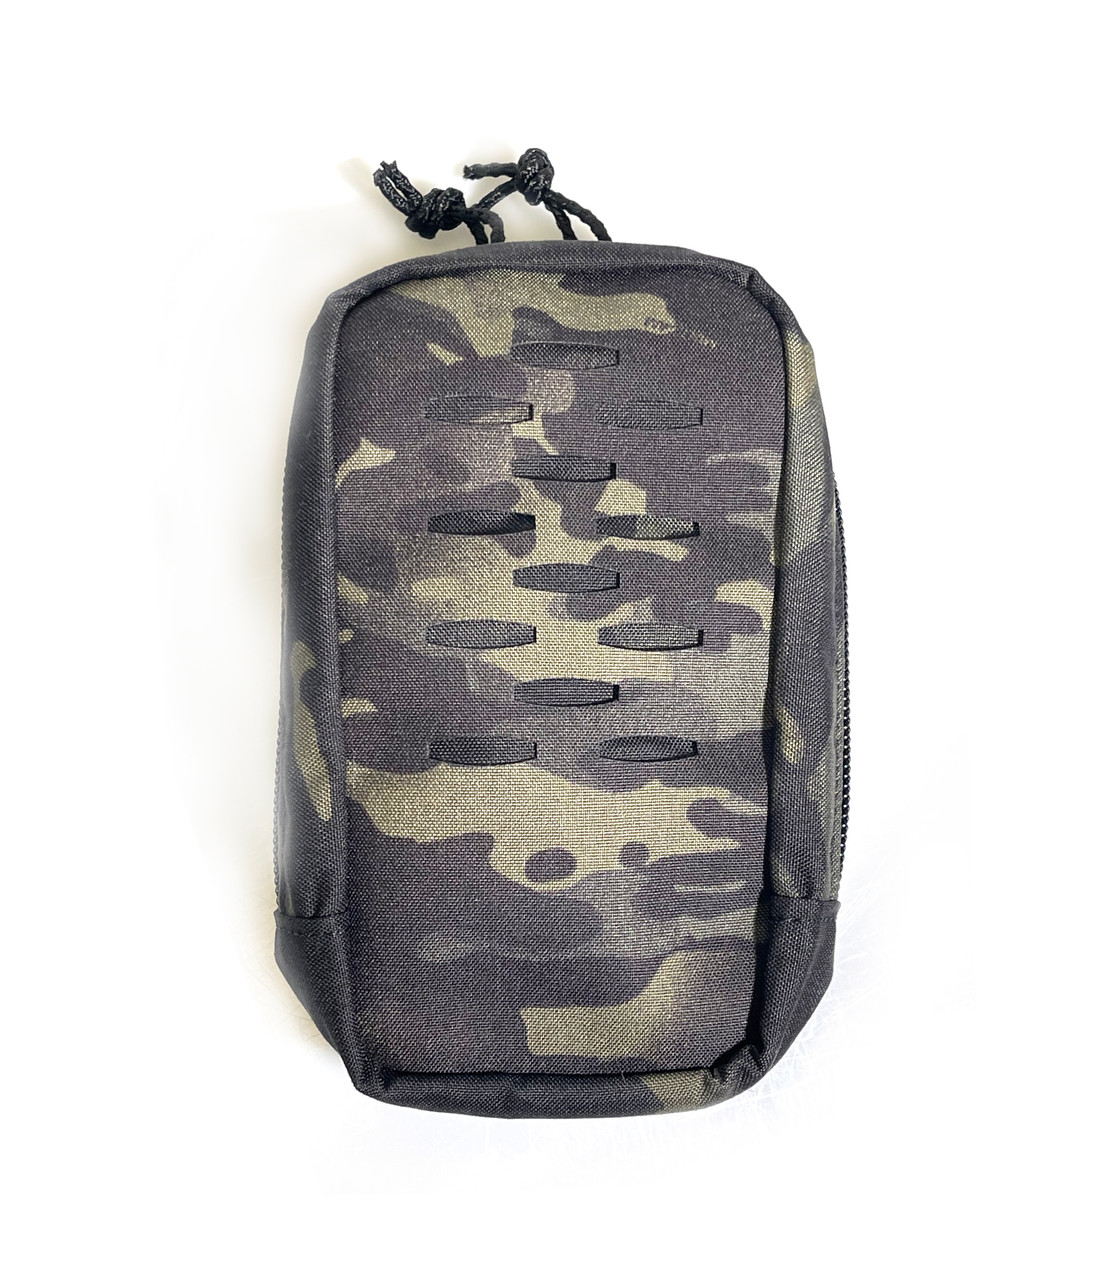 IFAK Medical Pouch | Tactical Medical Pouch | MOLLE Medical Pouch